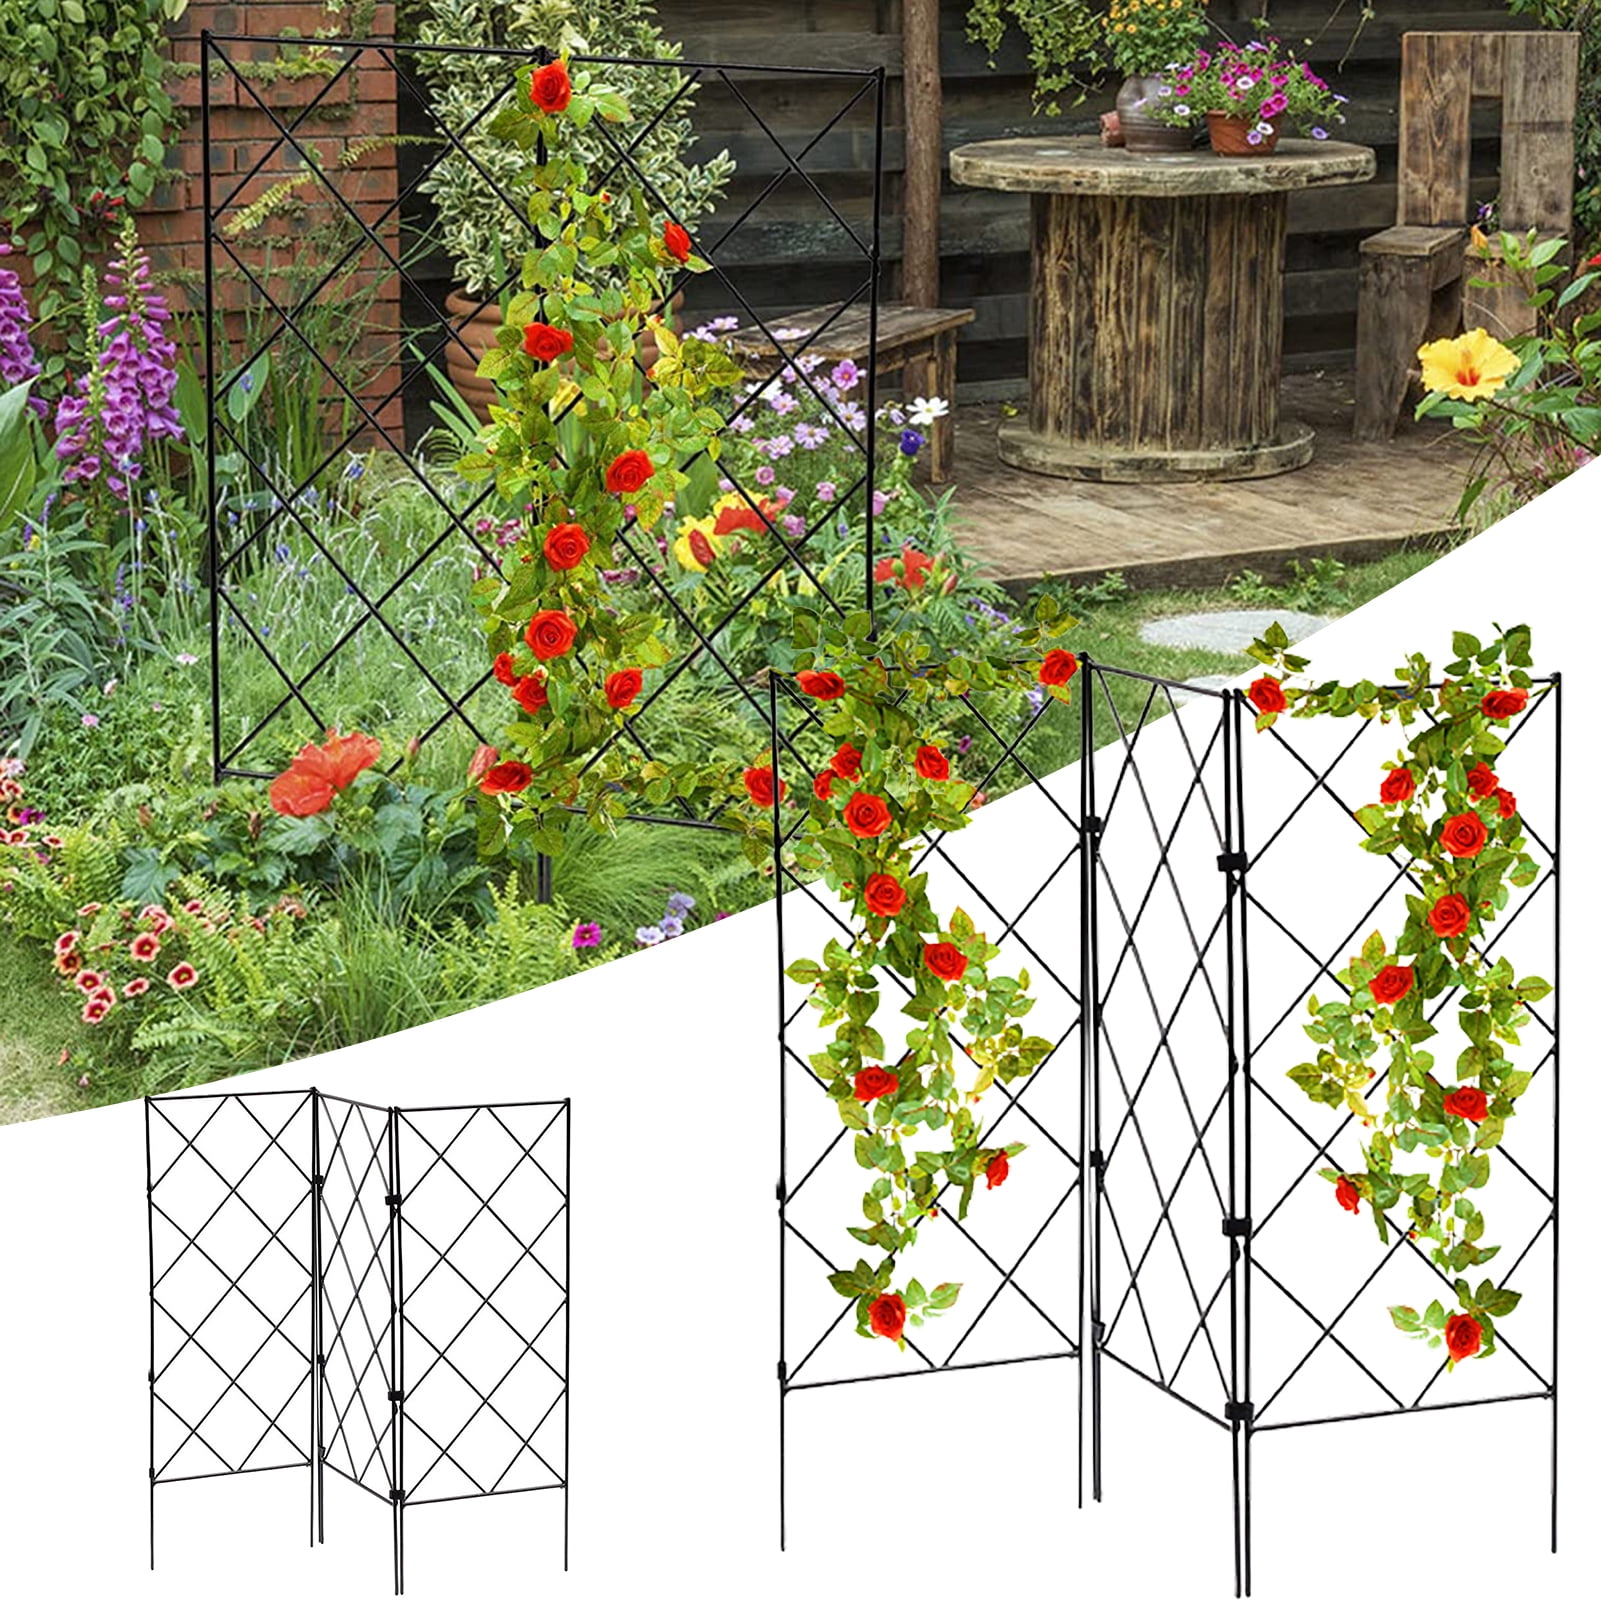 YARDWE Garden Trellis Plant Support for Climbing Vines and Flowers Stands Metal Wire Lattices Iron Potted Support for Ivy Rose Grape Cucumber Clematis Black 